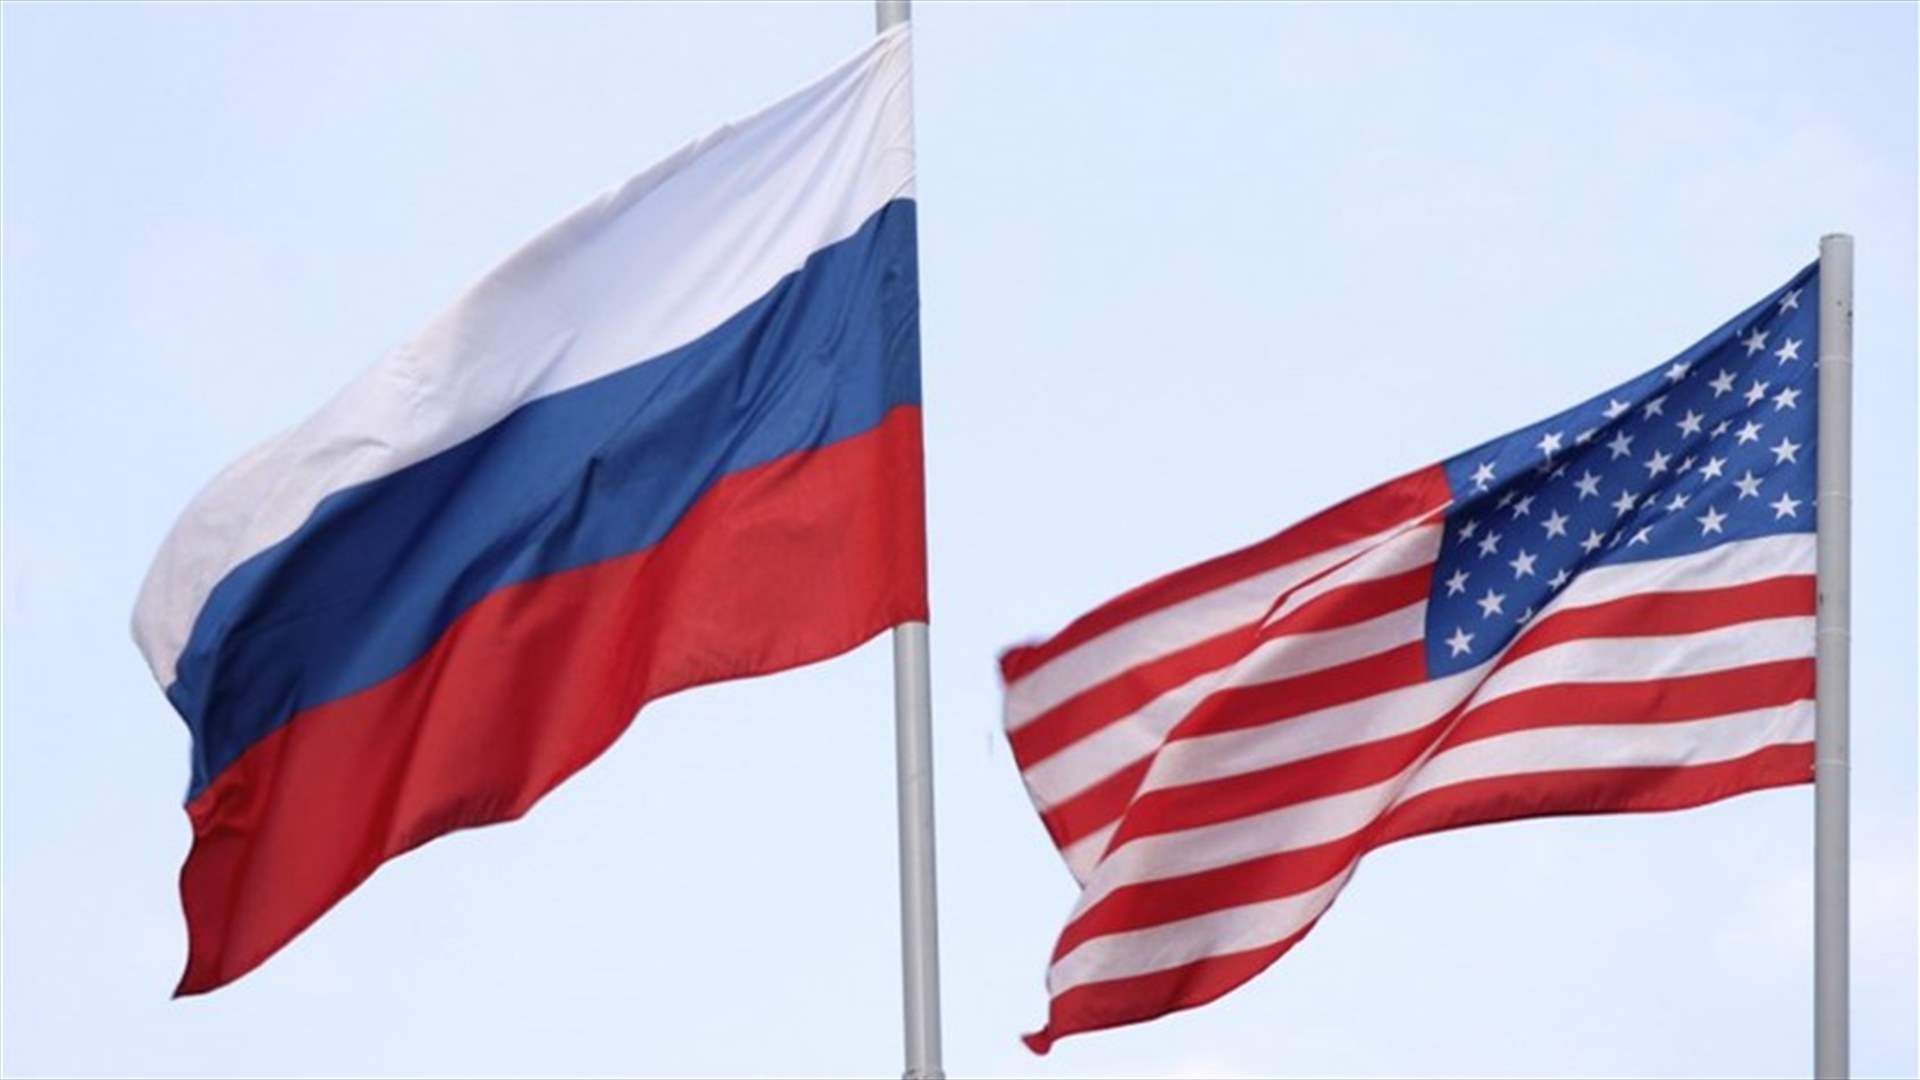 Russia, U.S. agree on need to improve military coordination in Syria - Russian defence ministry